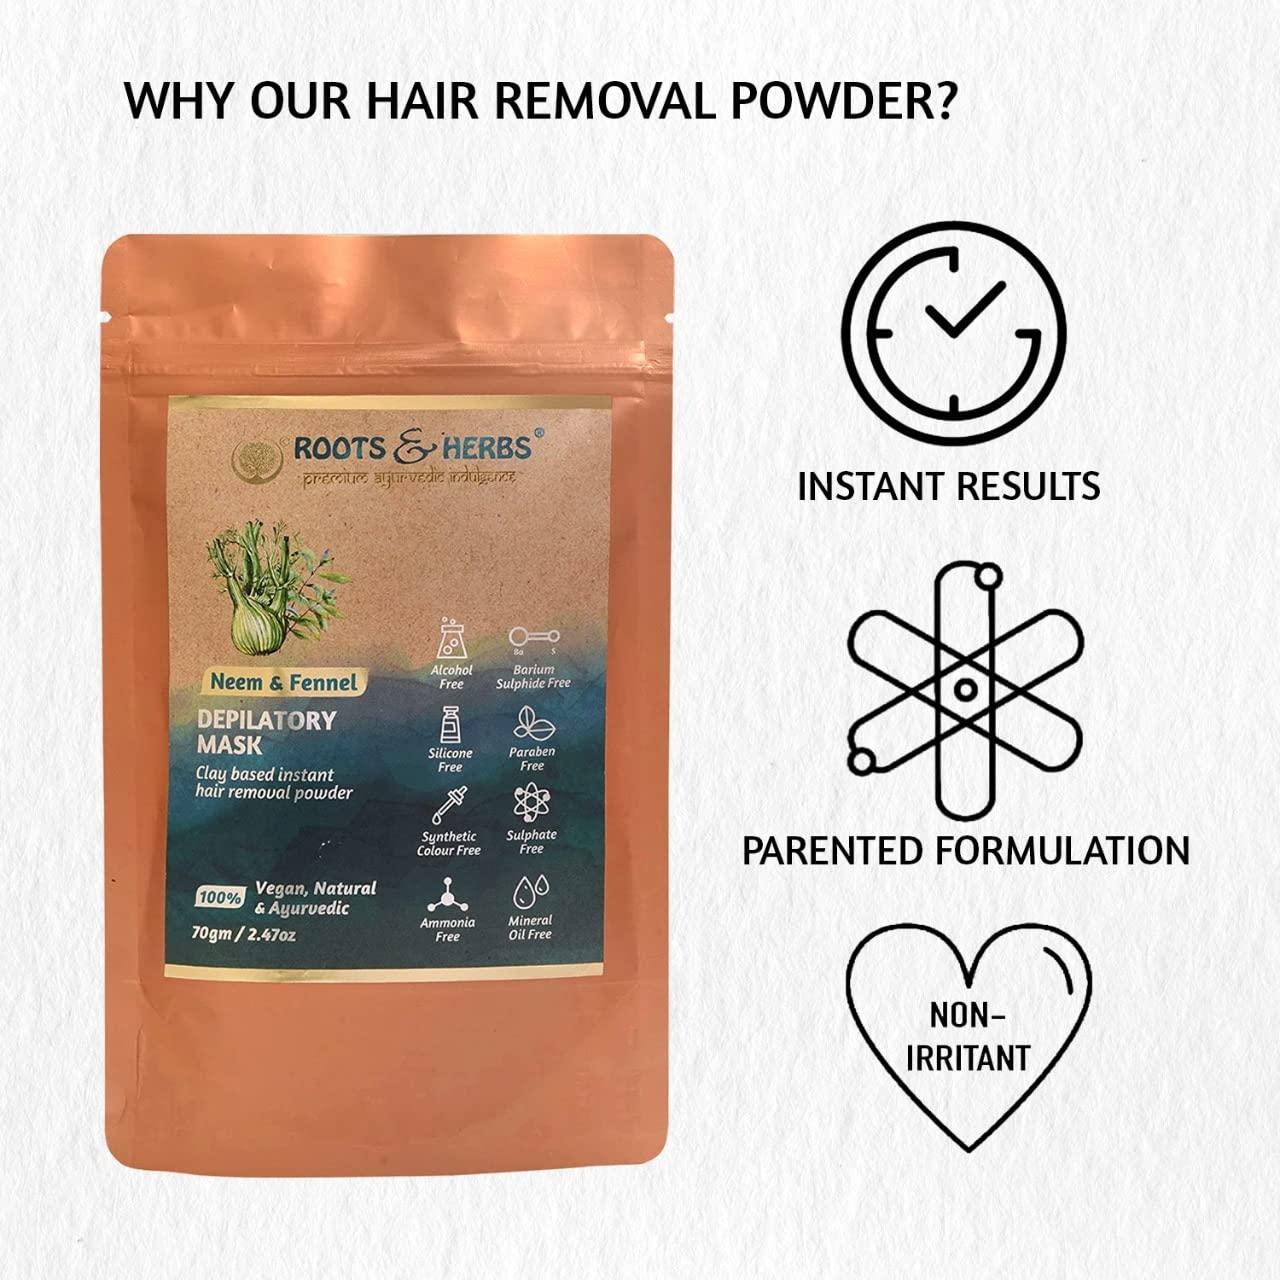 ROOTS AND HERBS Vegan Hair Removal - Neem and Fennel Depilatory Mask - Men  and Women's Facial Hair Removal for sensitive skin - Organic Hair remover,  Pubic, Bikini, Leg Mask Hair Remover Powder Waxing